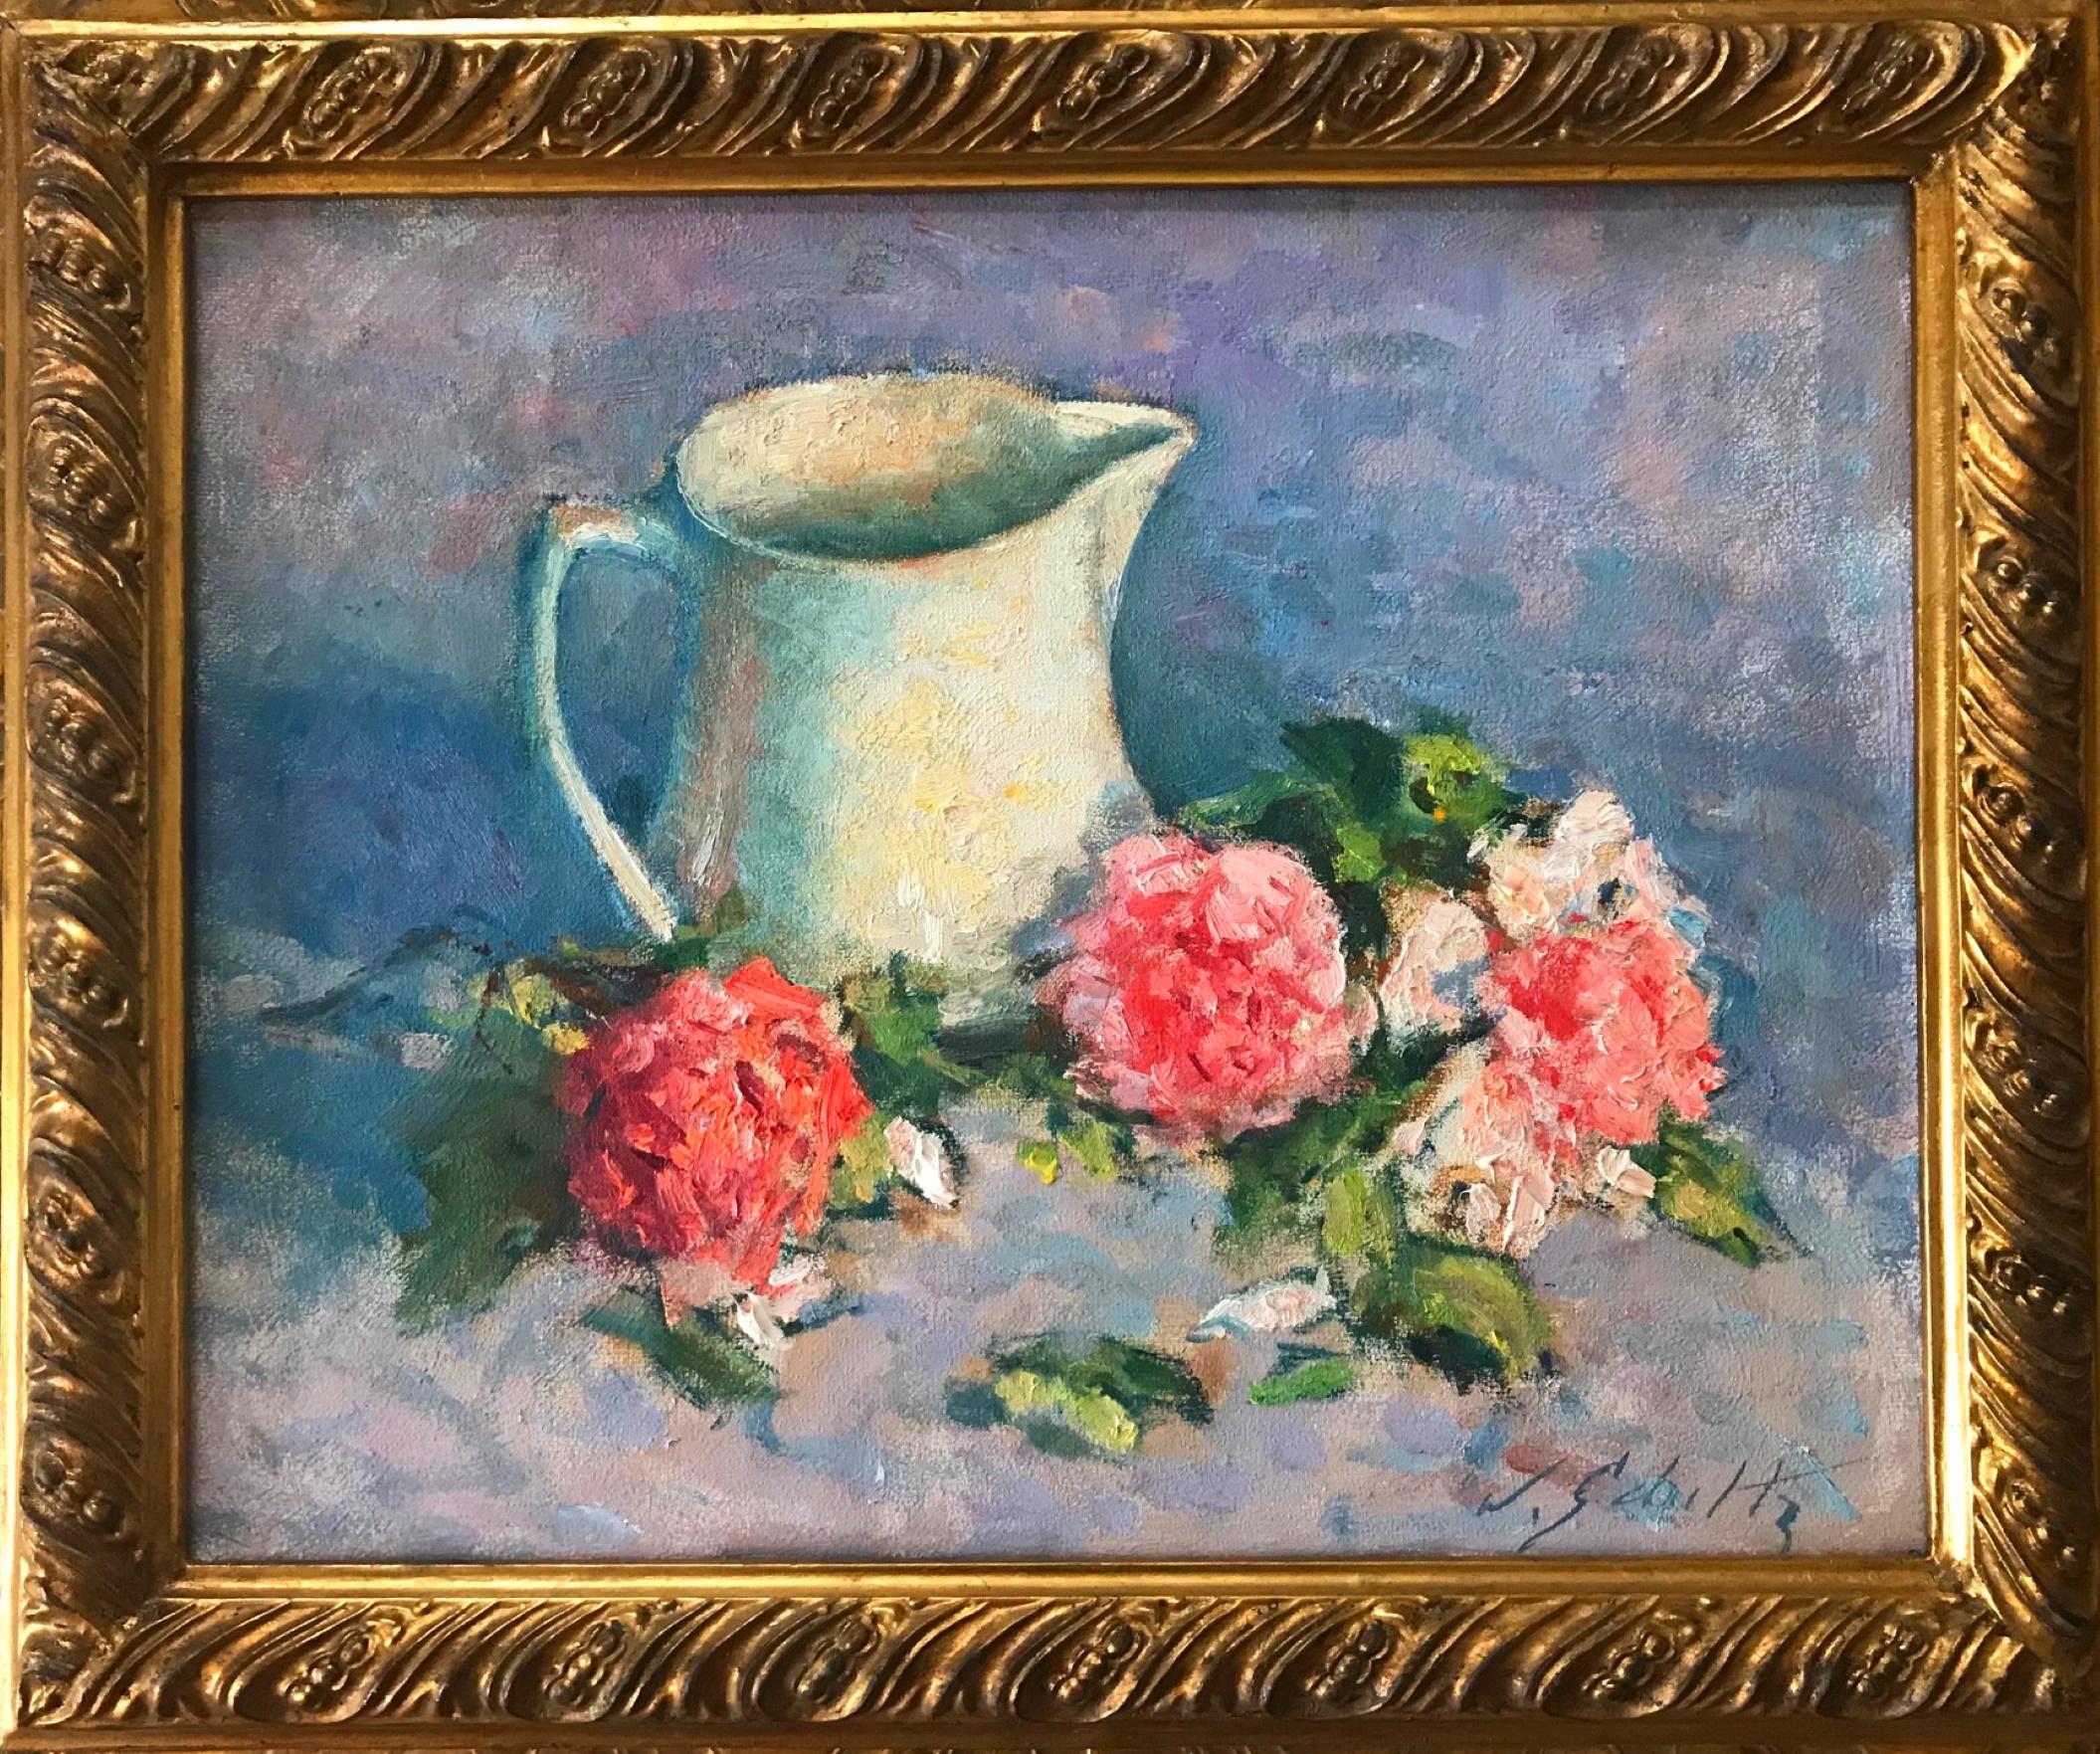 Late impressionist still life oil painting, pitcher with peonies, signed, early 20th century

This late impressionistic floral still life with pitcher is painted with heavy impasto in pastel colors on heavy linen. It is housed in a substantial